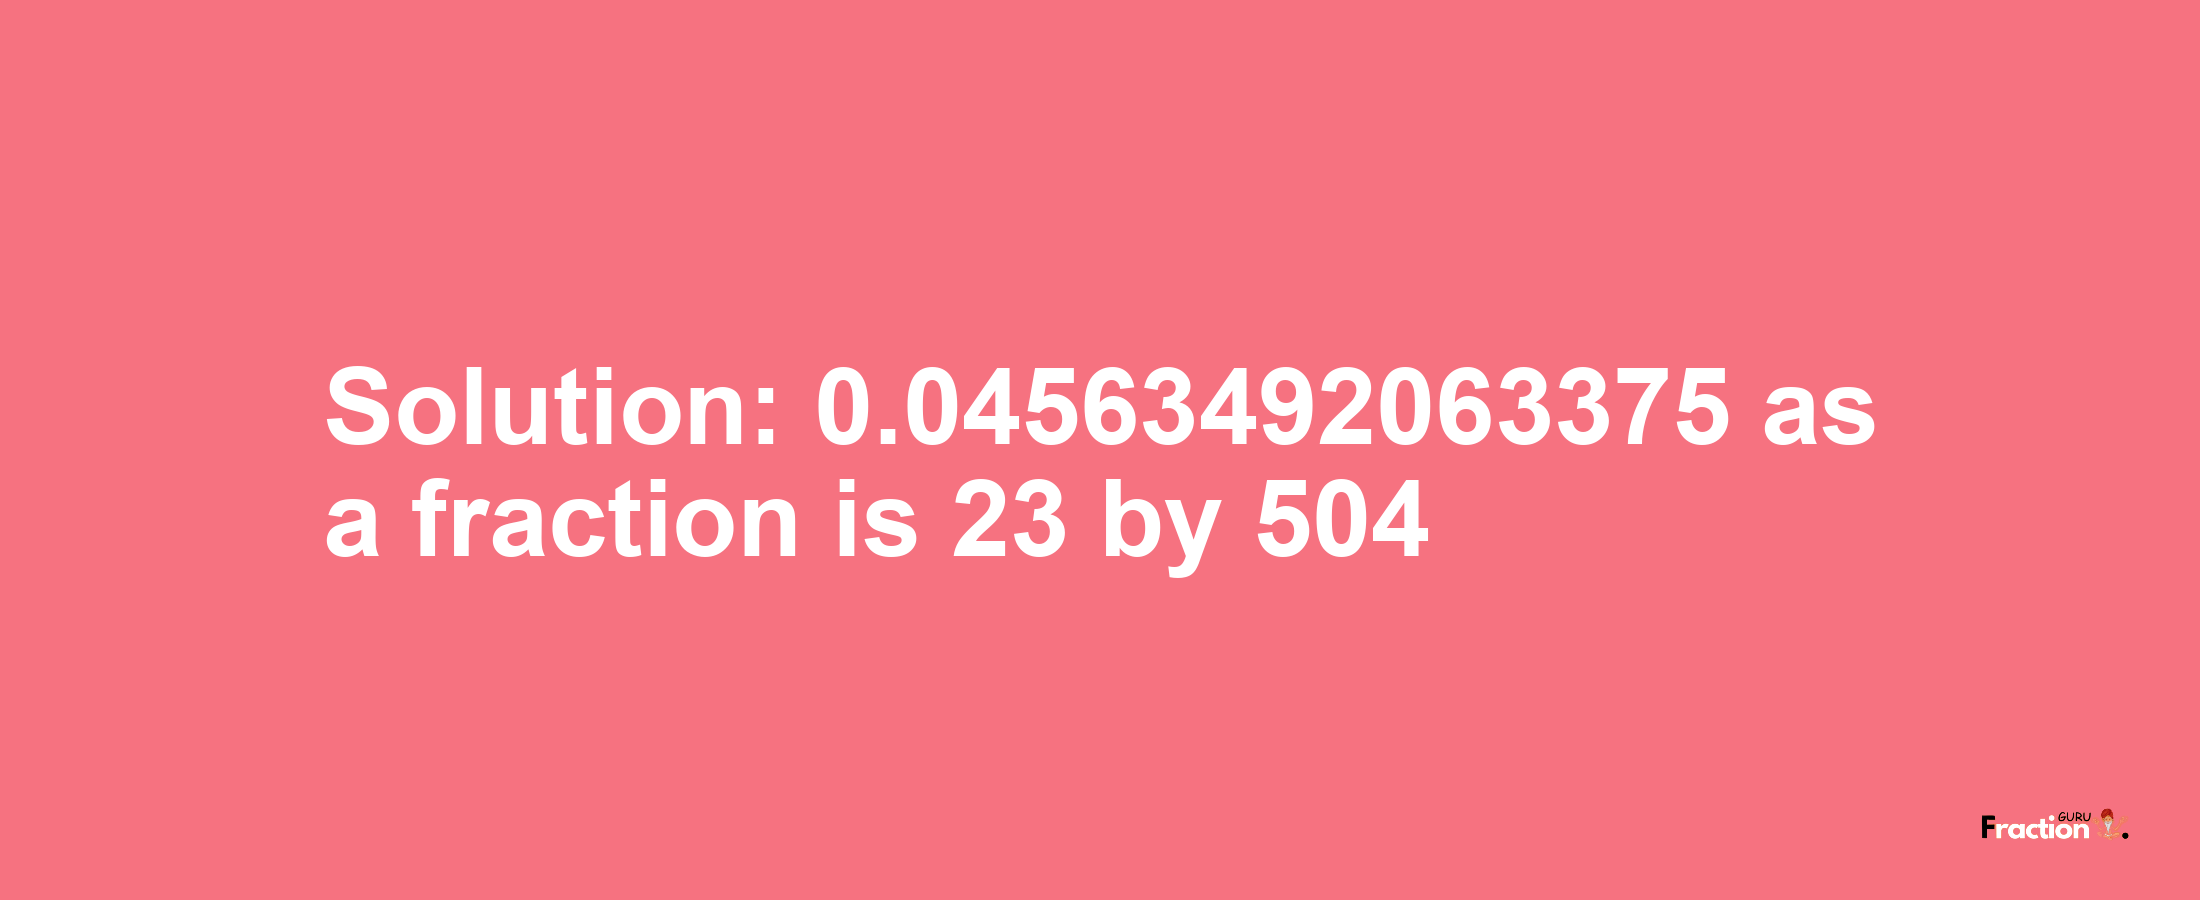 Solution:0.04563492063375 as a fraction is 23/504